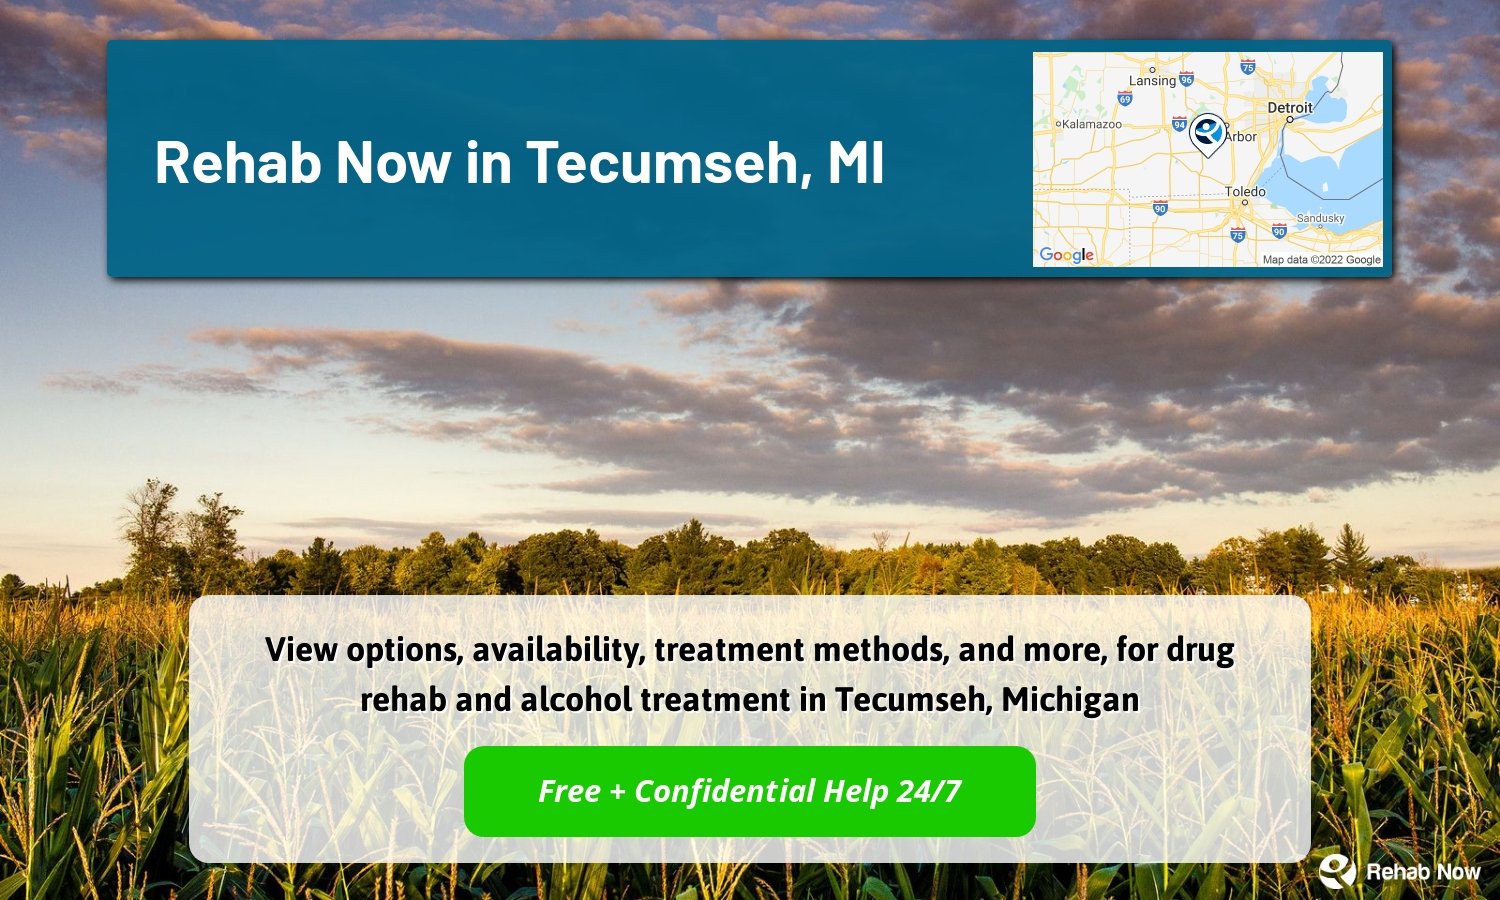 View options, availability, treatment methods, and more, for drug rehab and alcohol treatment in Tecumseh, Michigan